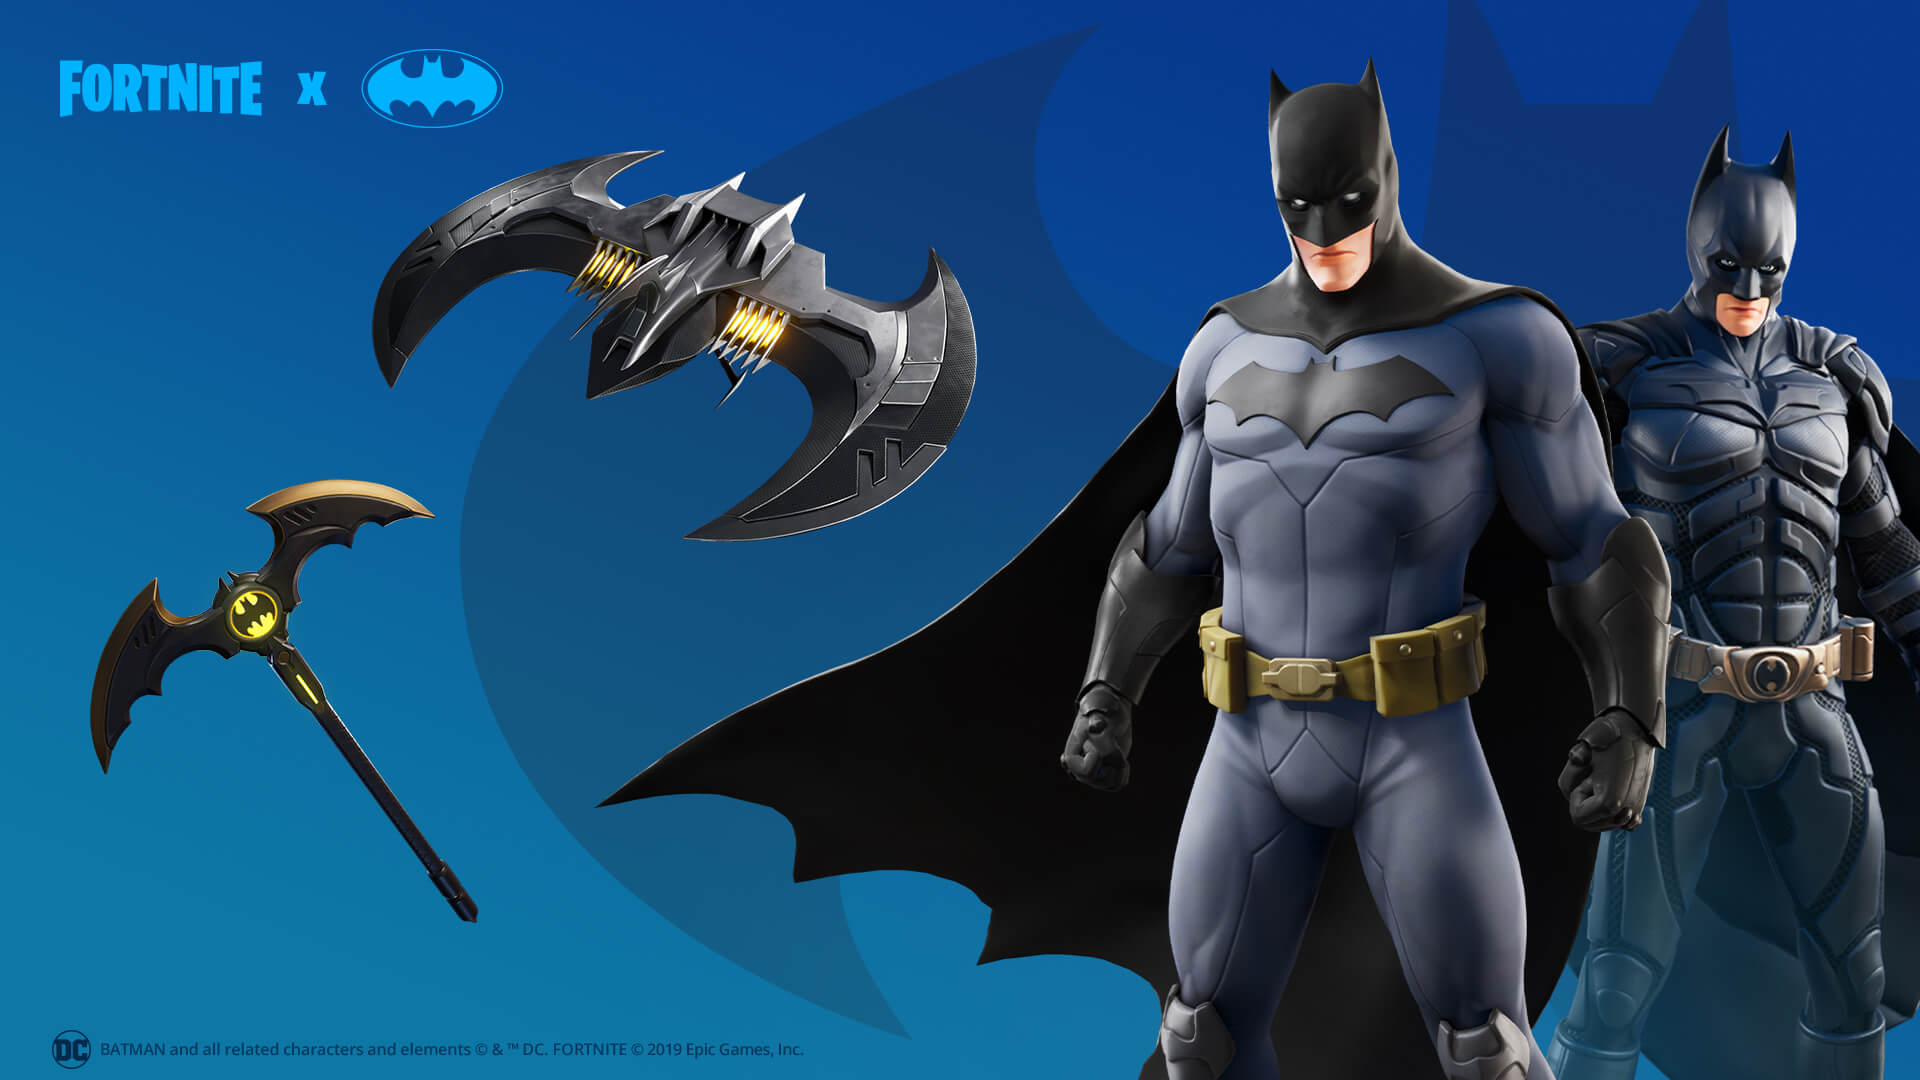 Image for Fortnite x Batman event has kicked off in celebration of the Bat's 80th anniversary